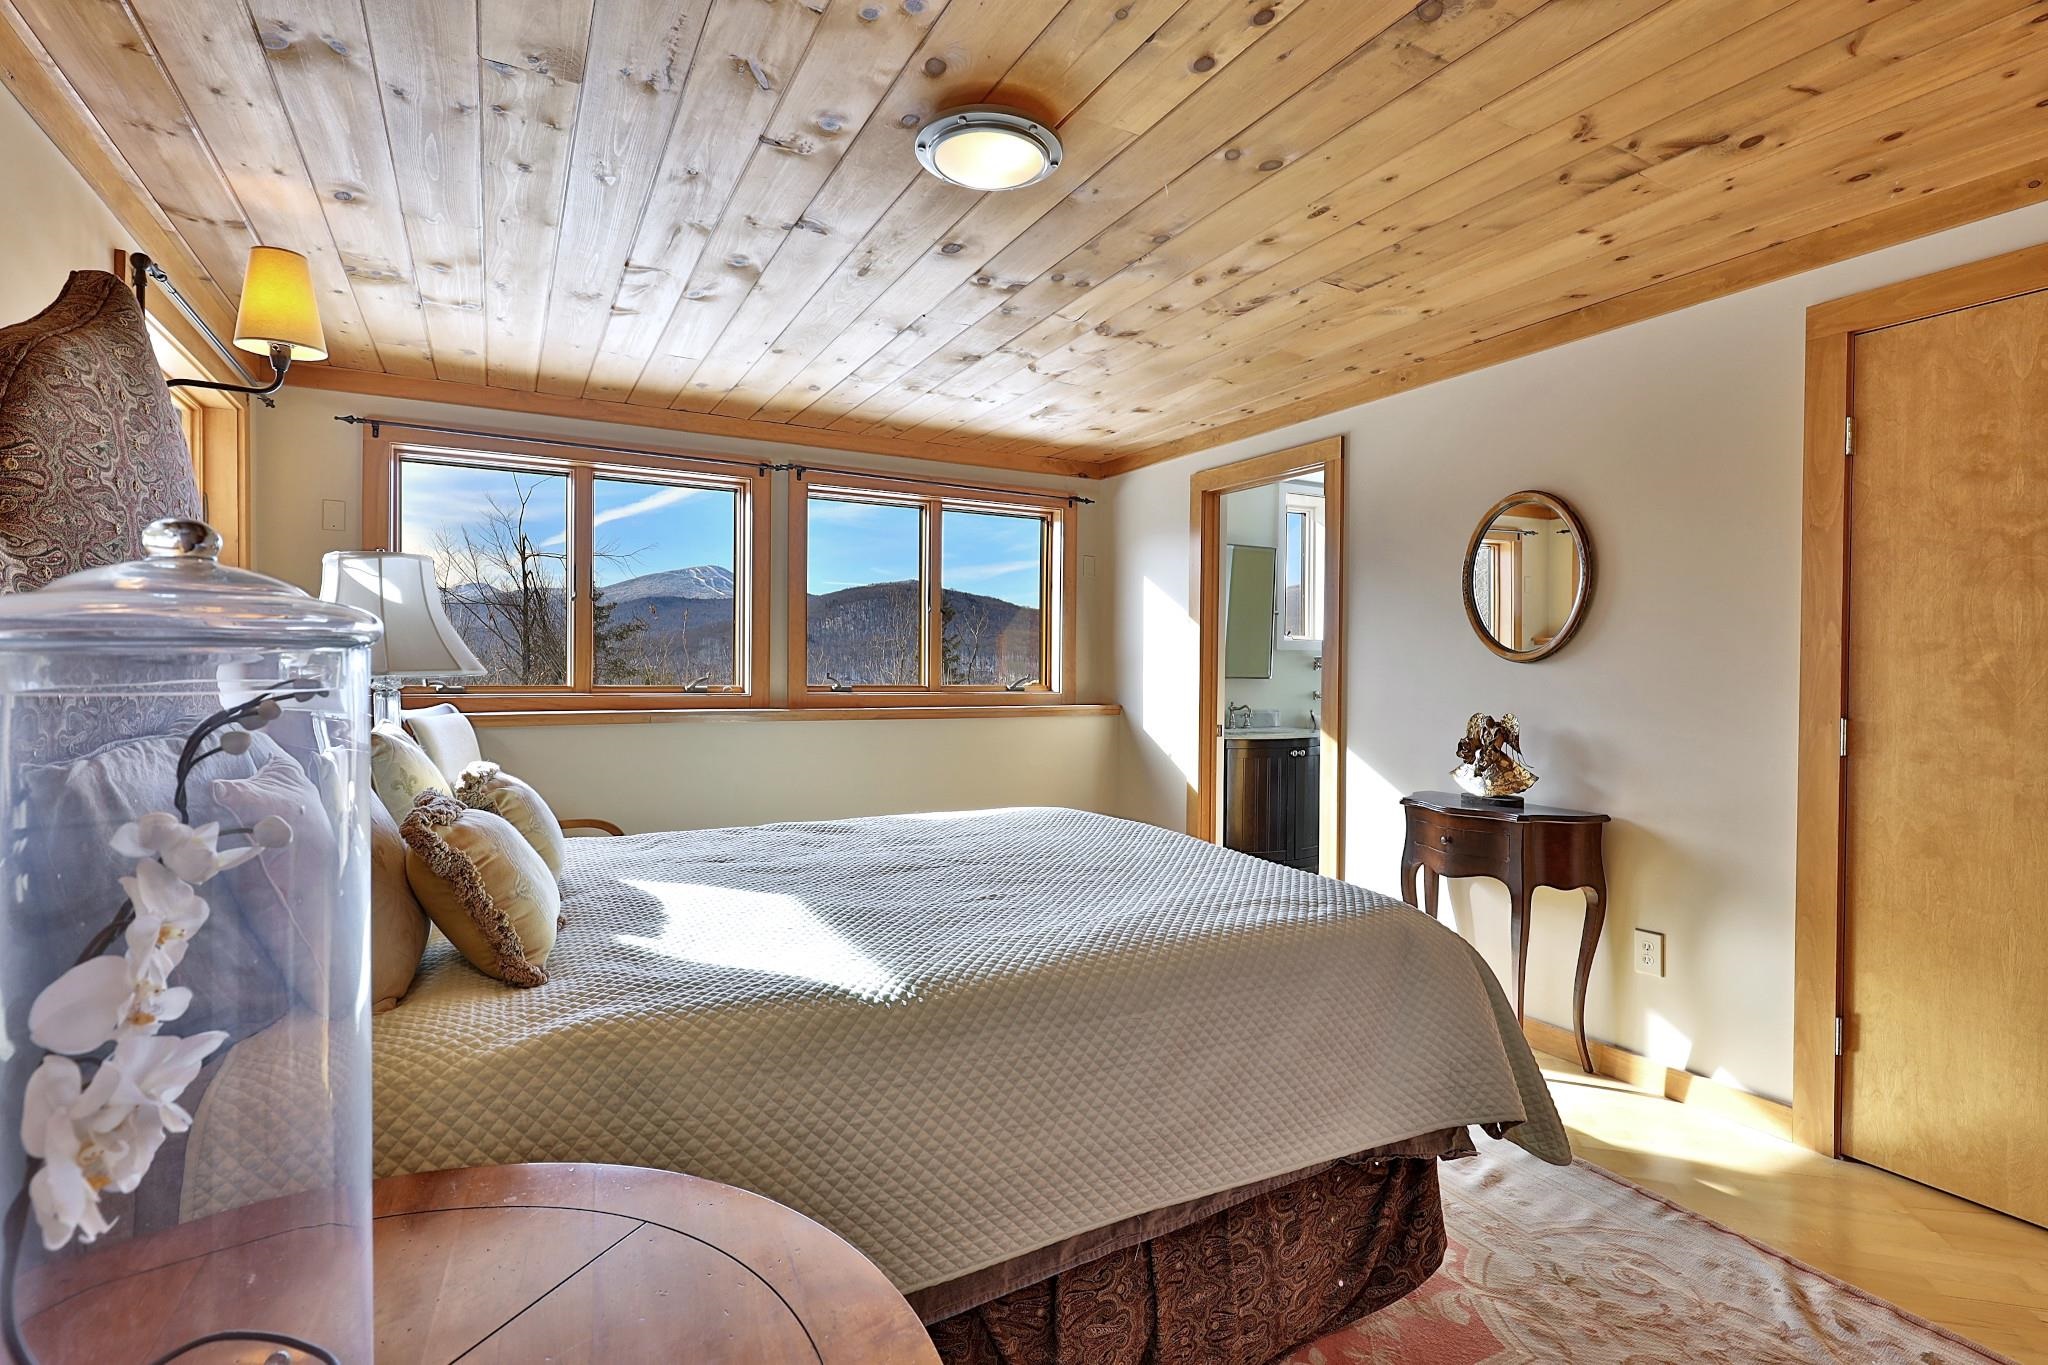 Downstairs primary bedroom with views of Killington and Pico.